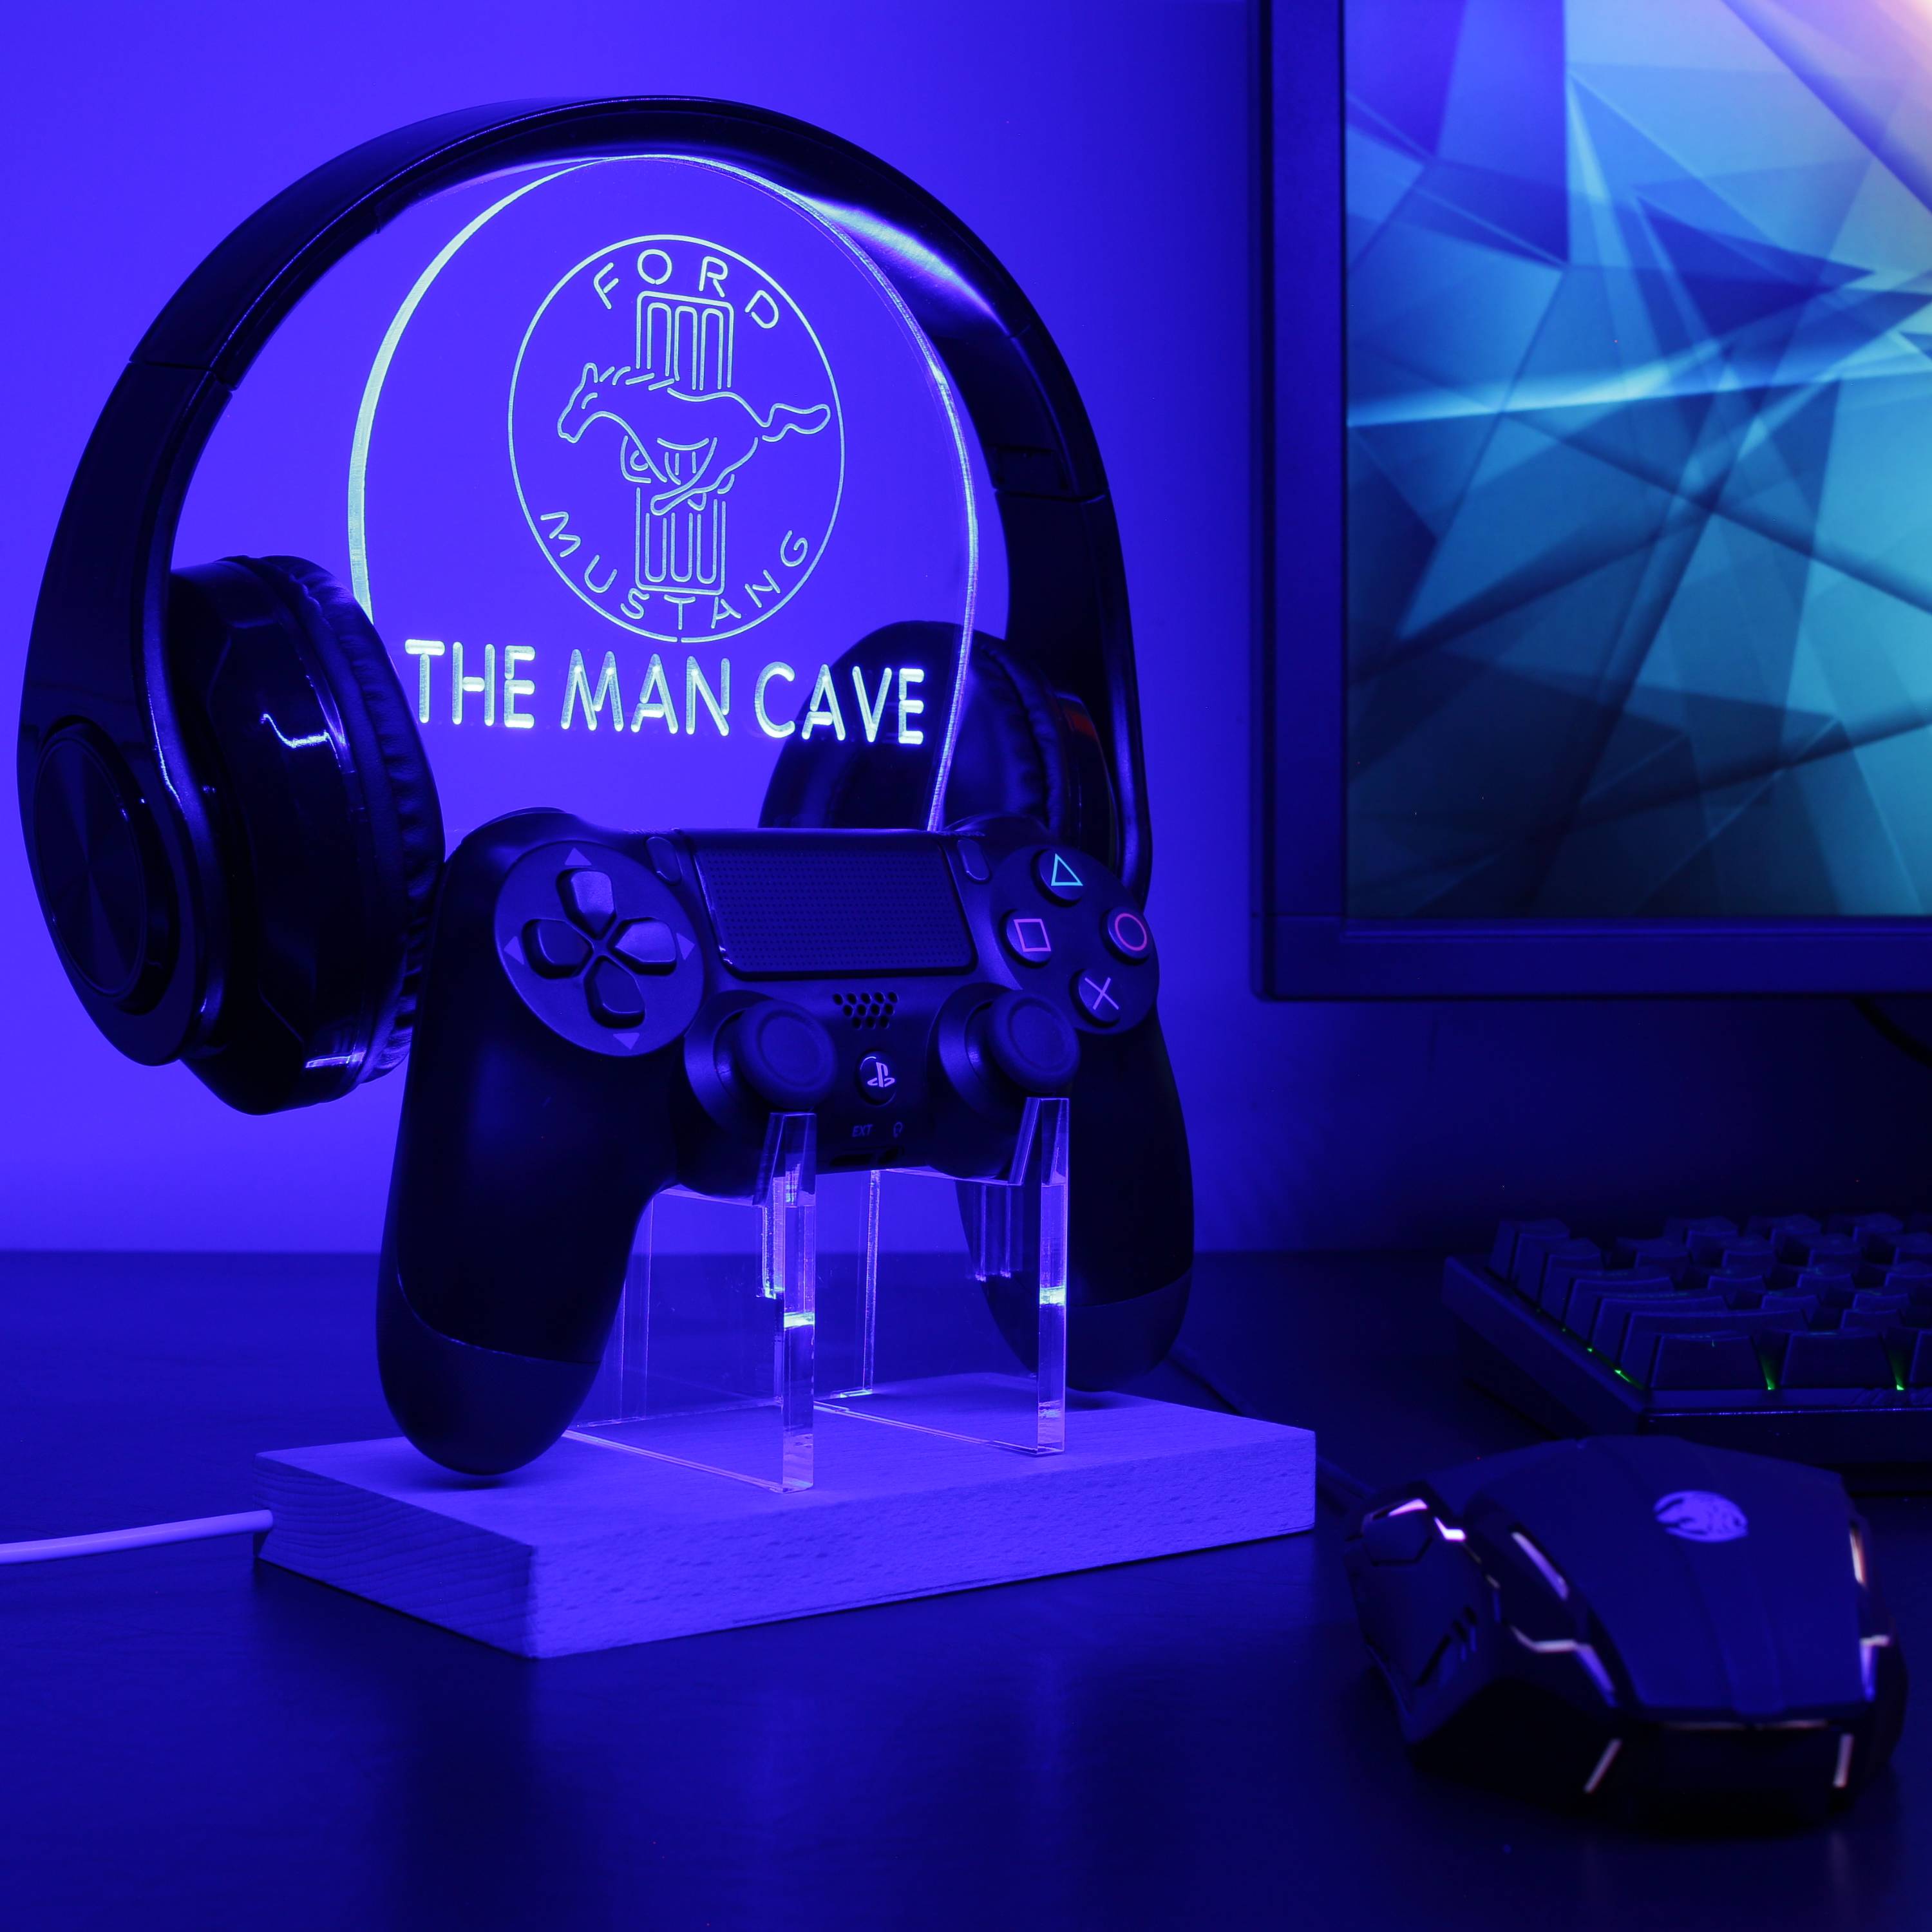 Ford Mustang Custom RGB LED Gaming Headset Controller Stand